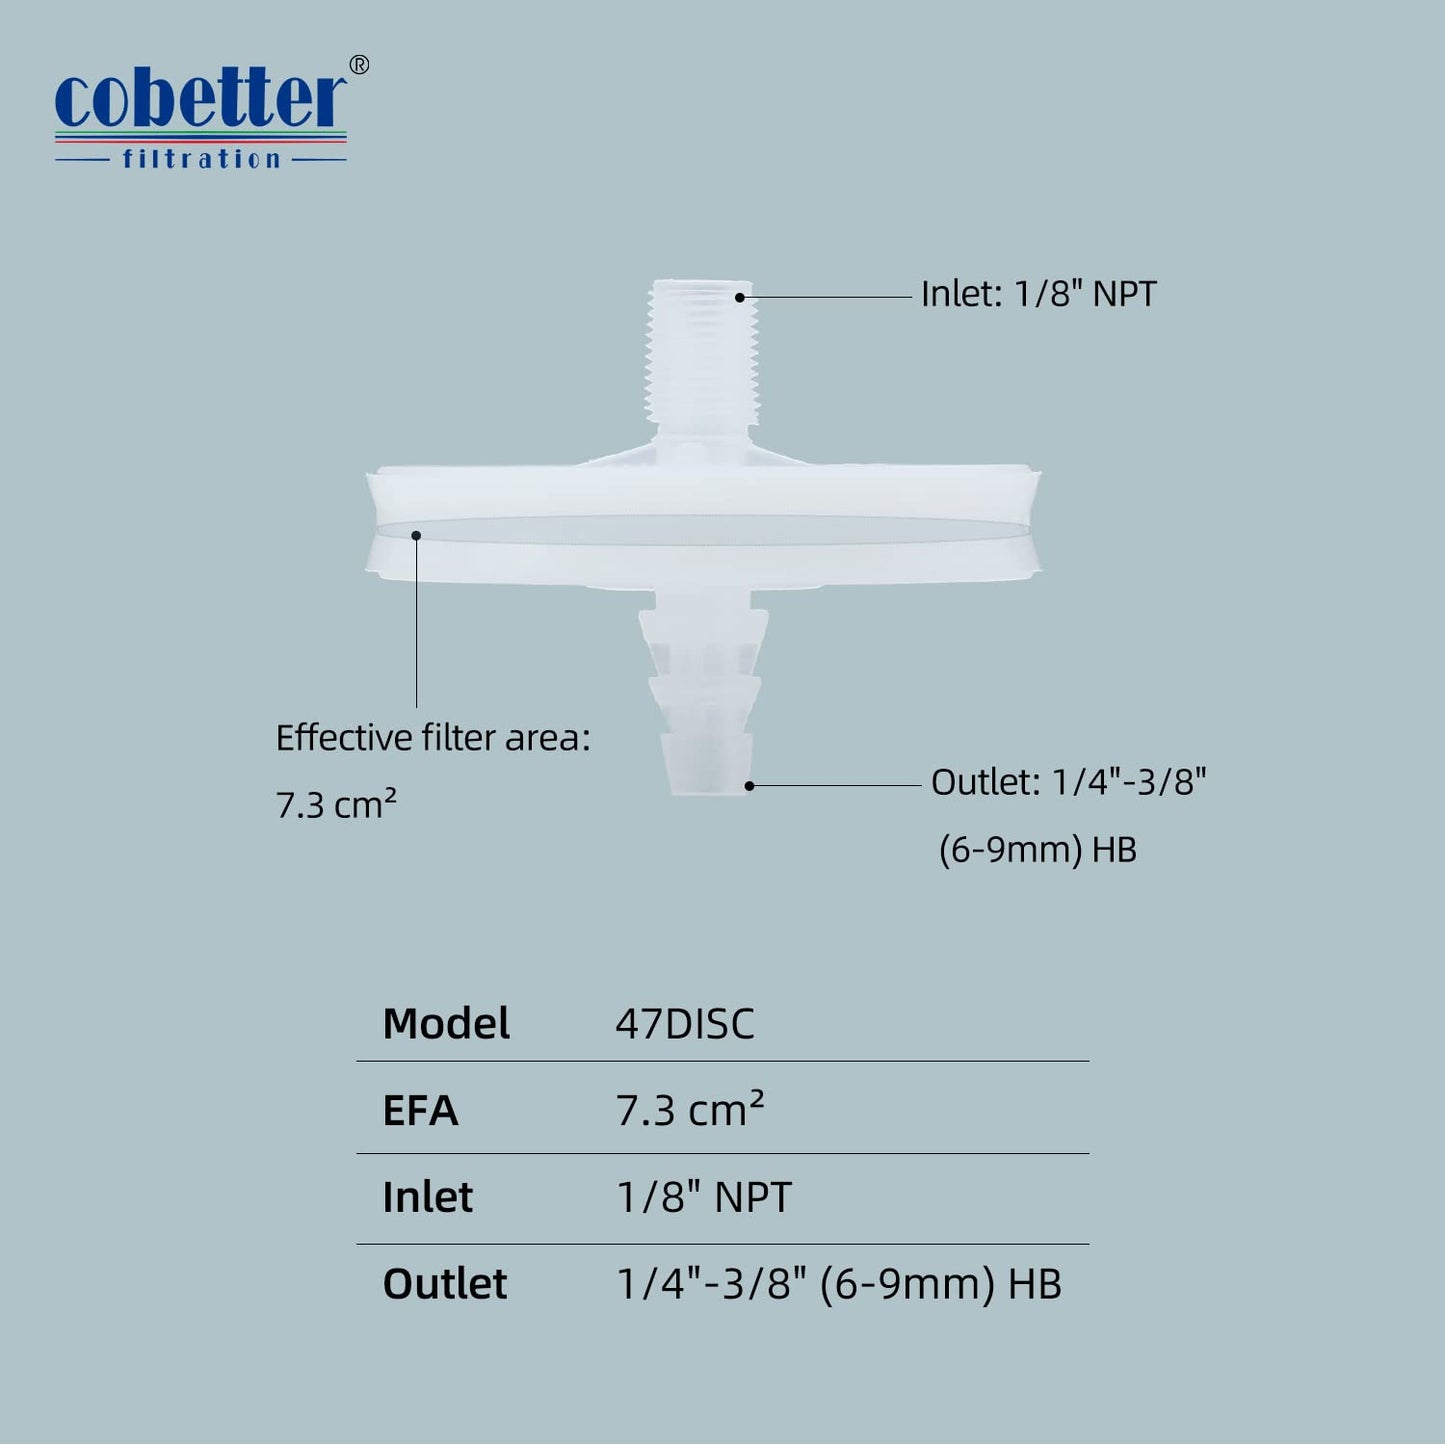 COBETTER 47DISC Venting Filter with Hydrophobic PTFE Membrane, Inlet 1/8''NPT, Outlet 1/4''-3/8'' Stepped Hose Barb 10/pk